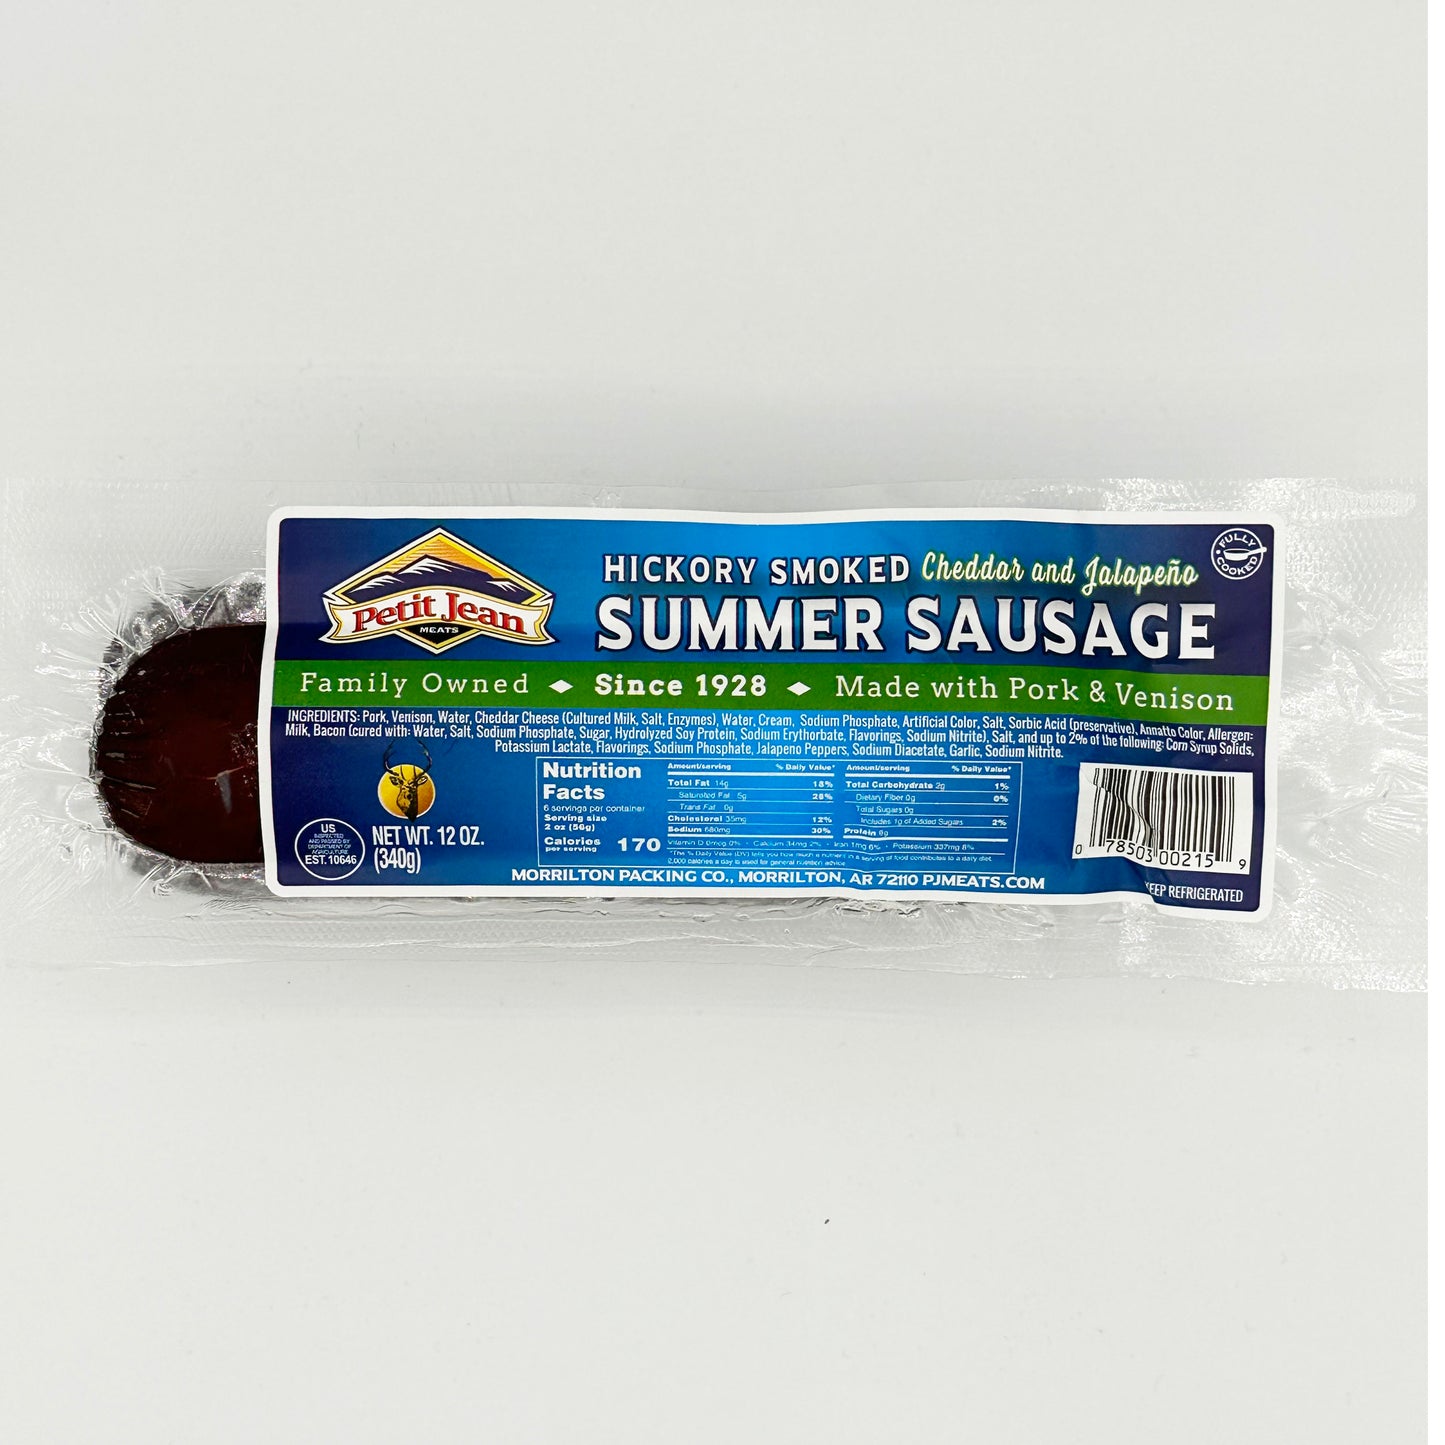 Summer Sausage, Pork & Venison with Jalapeno and Cheese 12oz (6-packages)